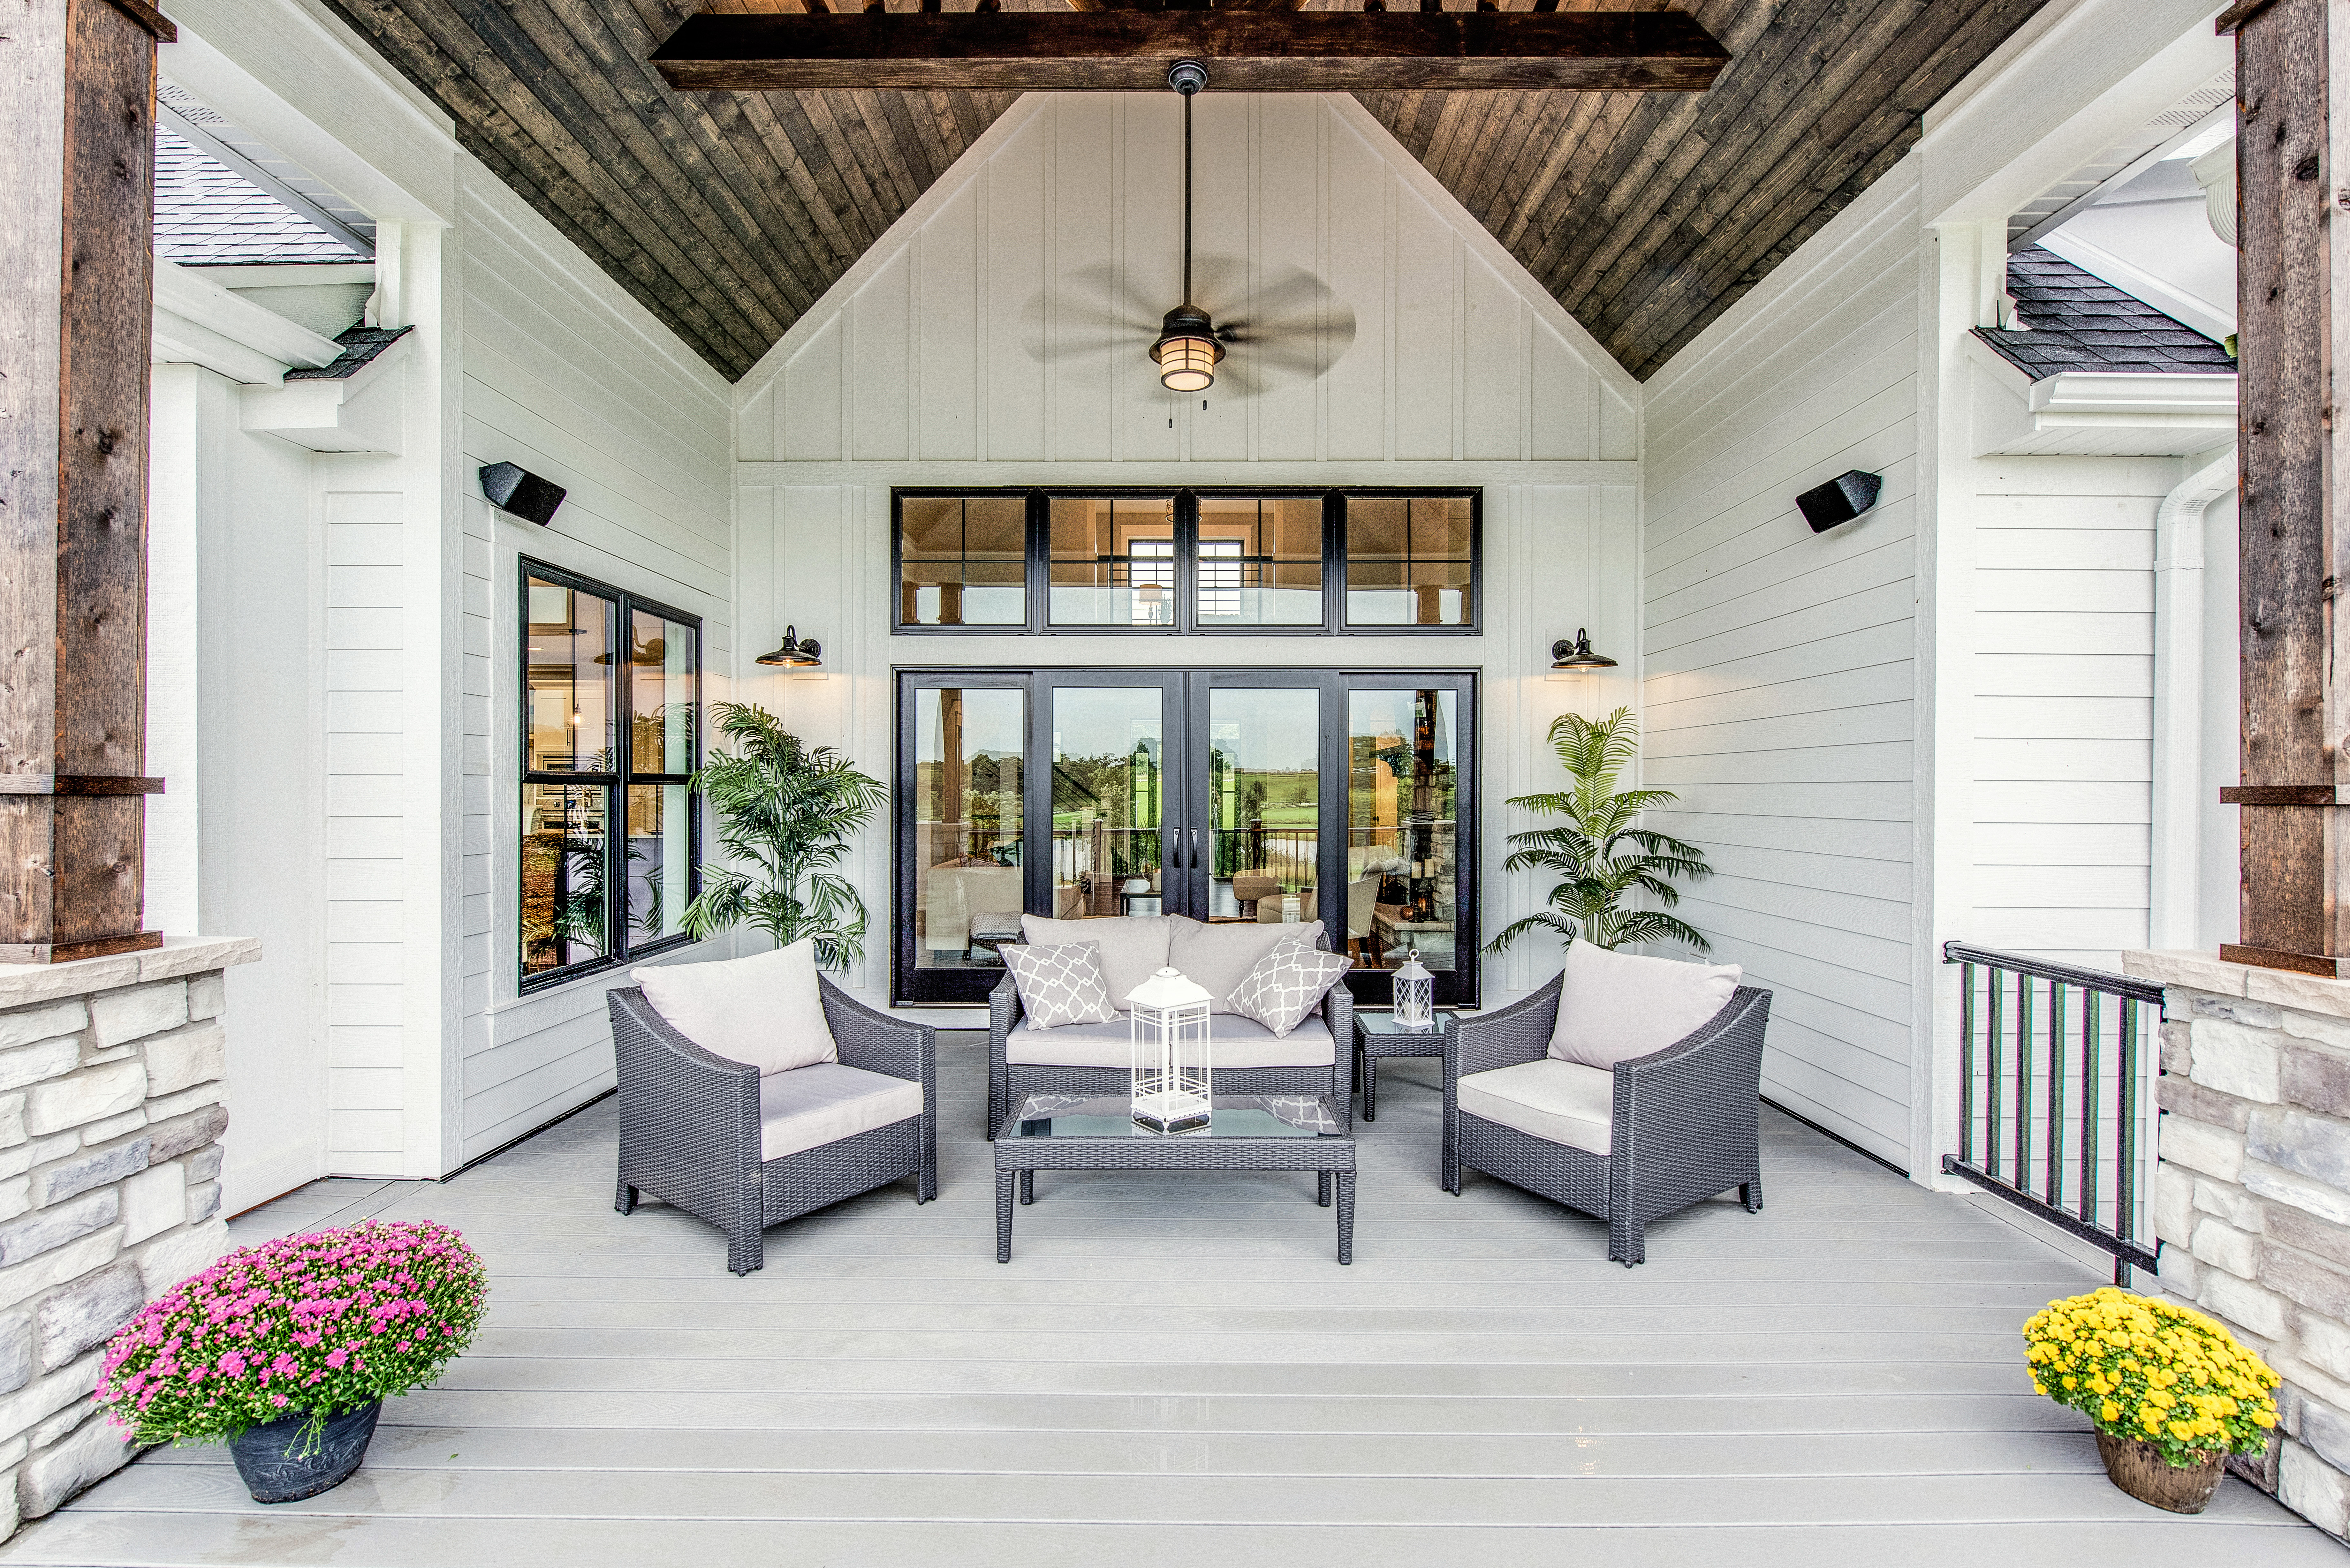 An enclosed exterior porch/outdoor living area, showing the house body and trim painted in white